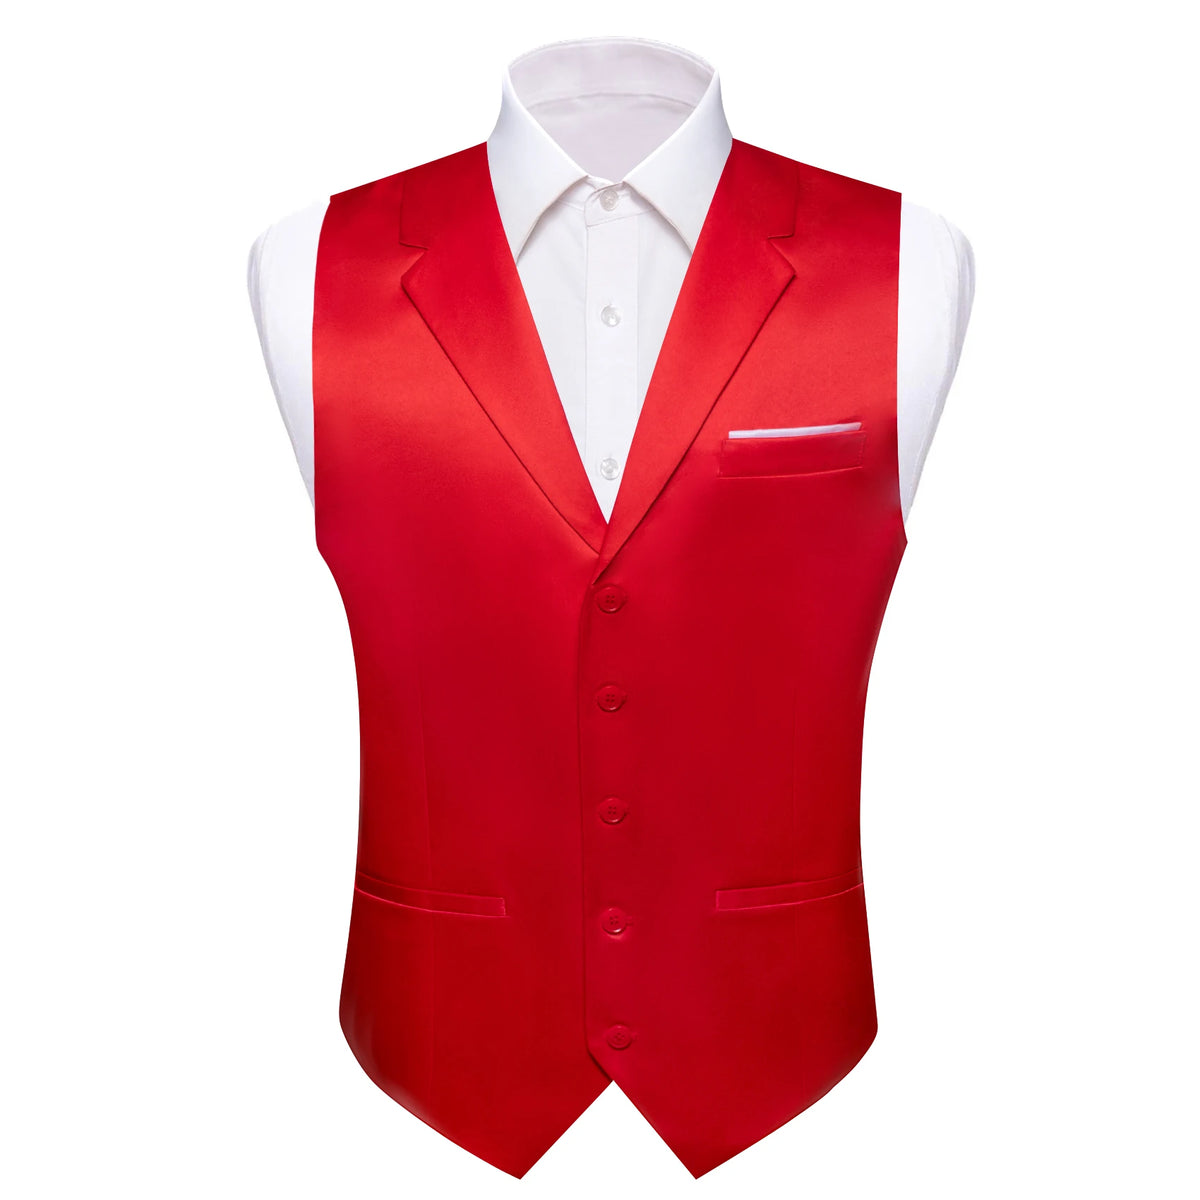 a red vest and white shirt on a mannequin